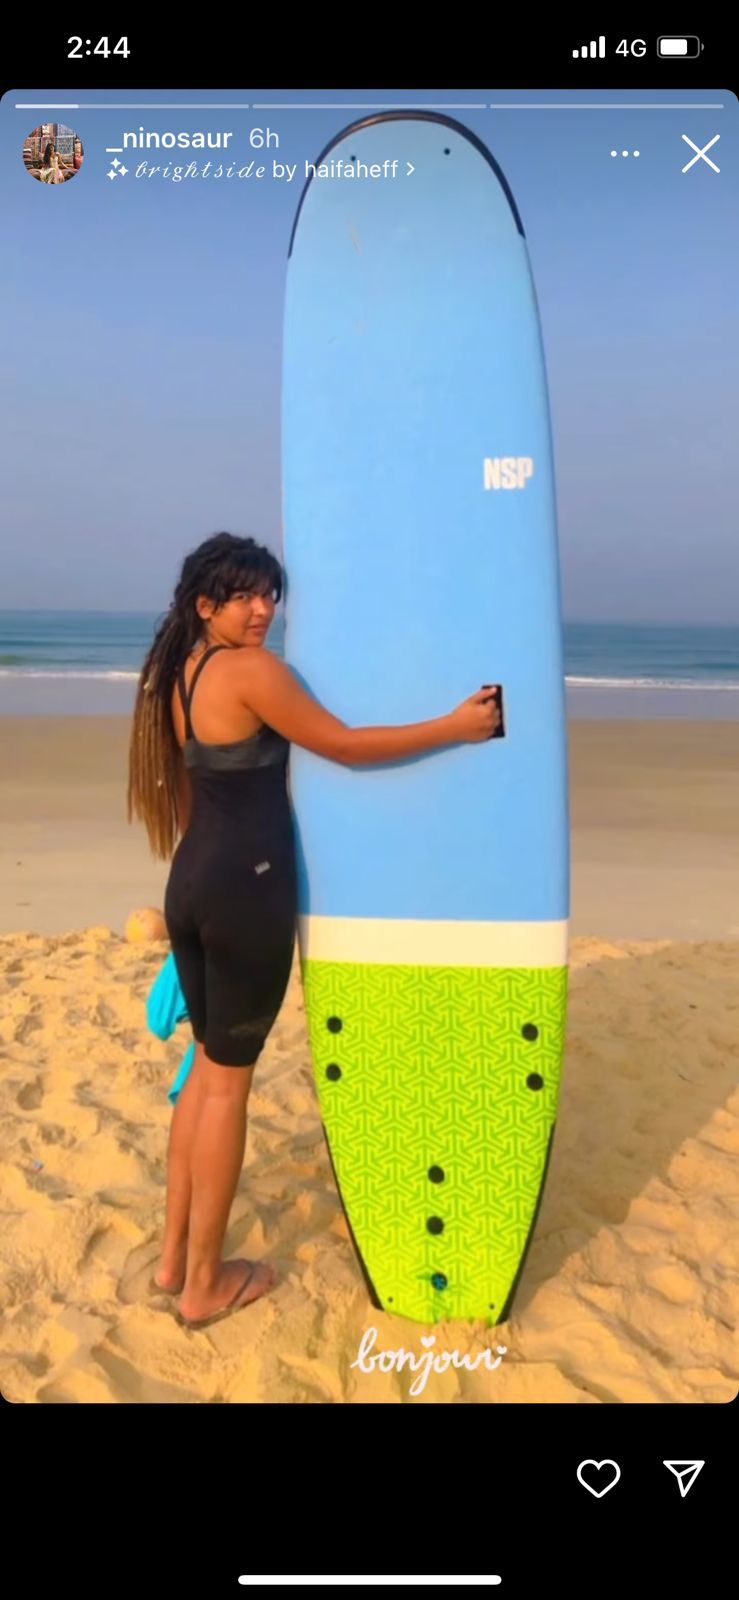 Nidhi Bhanushali posed with a surfing board